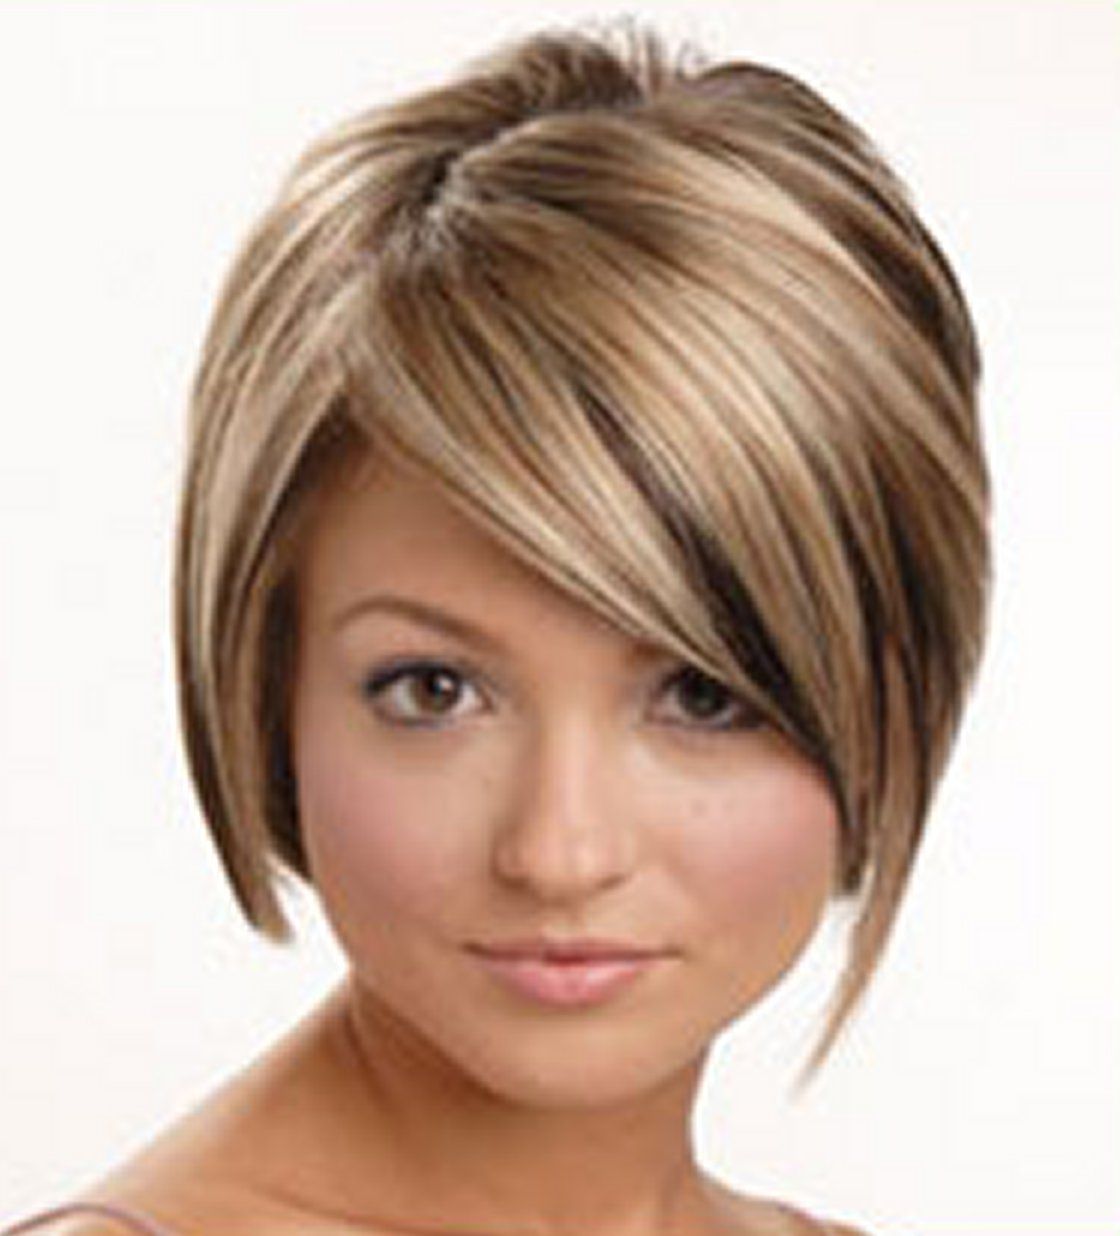 Cool Short Edgy Hairstyle Wallpaper ~ Global Hairstyles Regarding Short Edgy Haircuts For Girls (View 19 of 25)